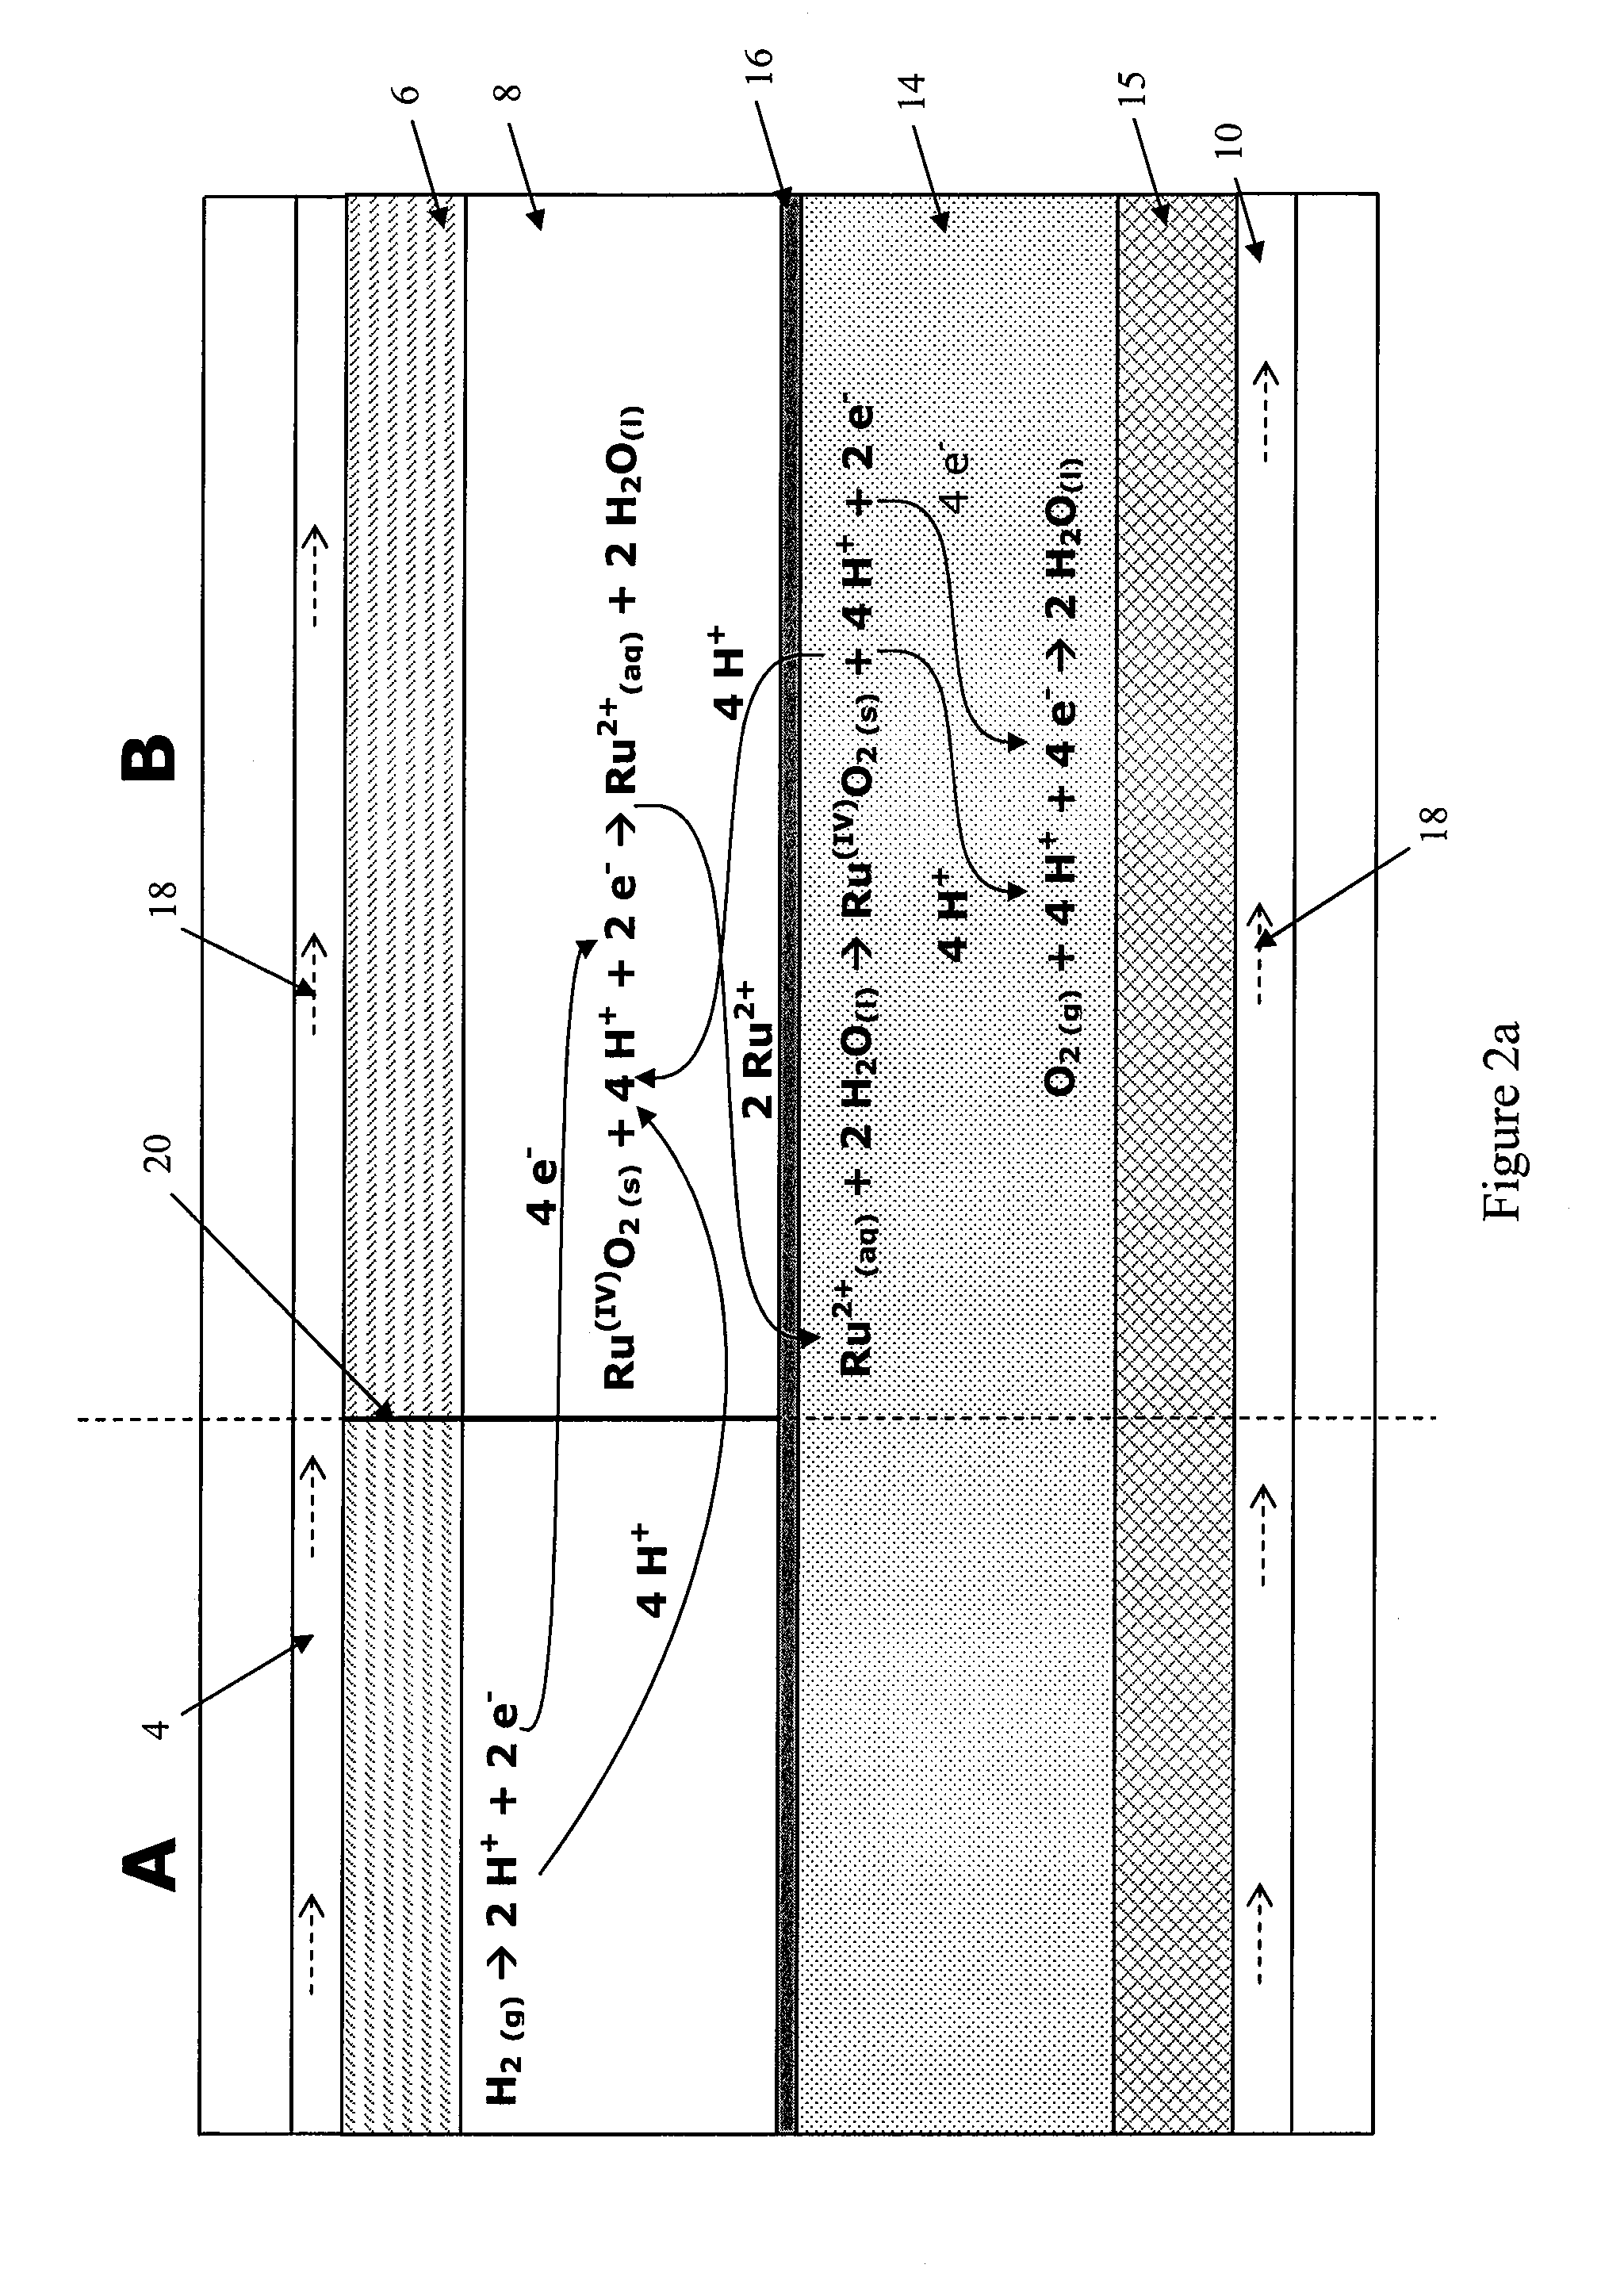 Fuel cell anode structure for voltage reversal tolerance